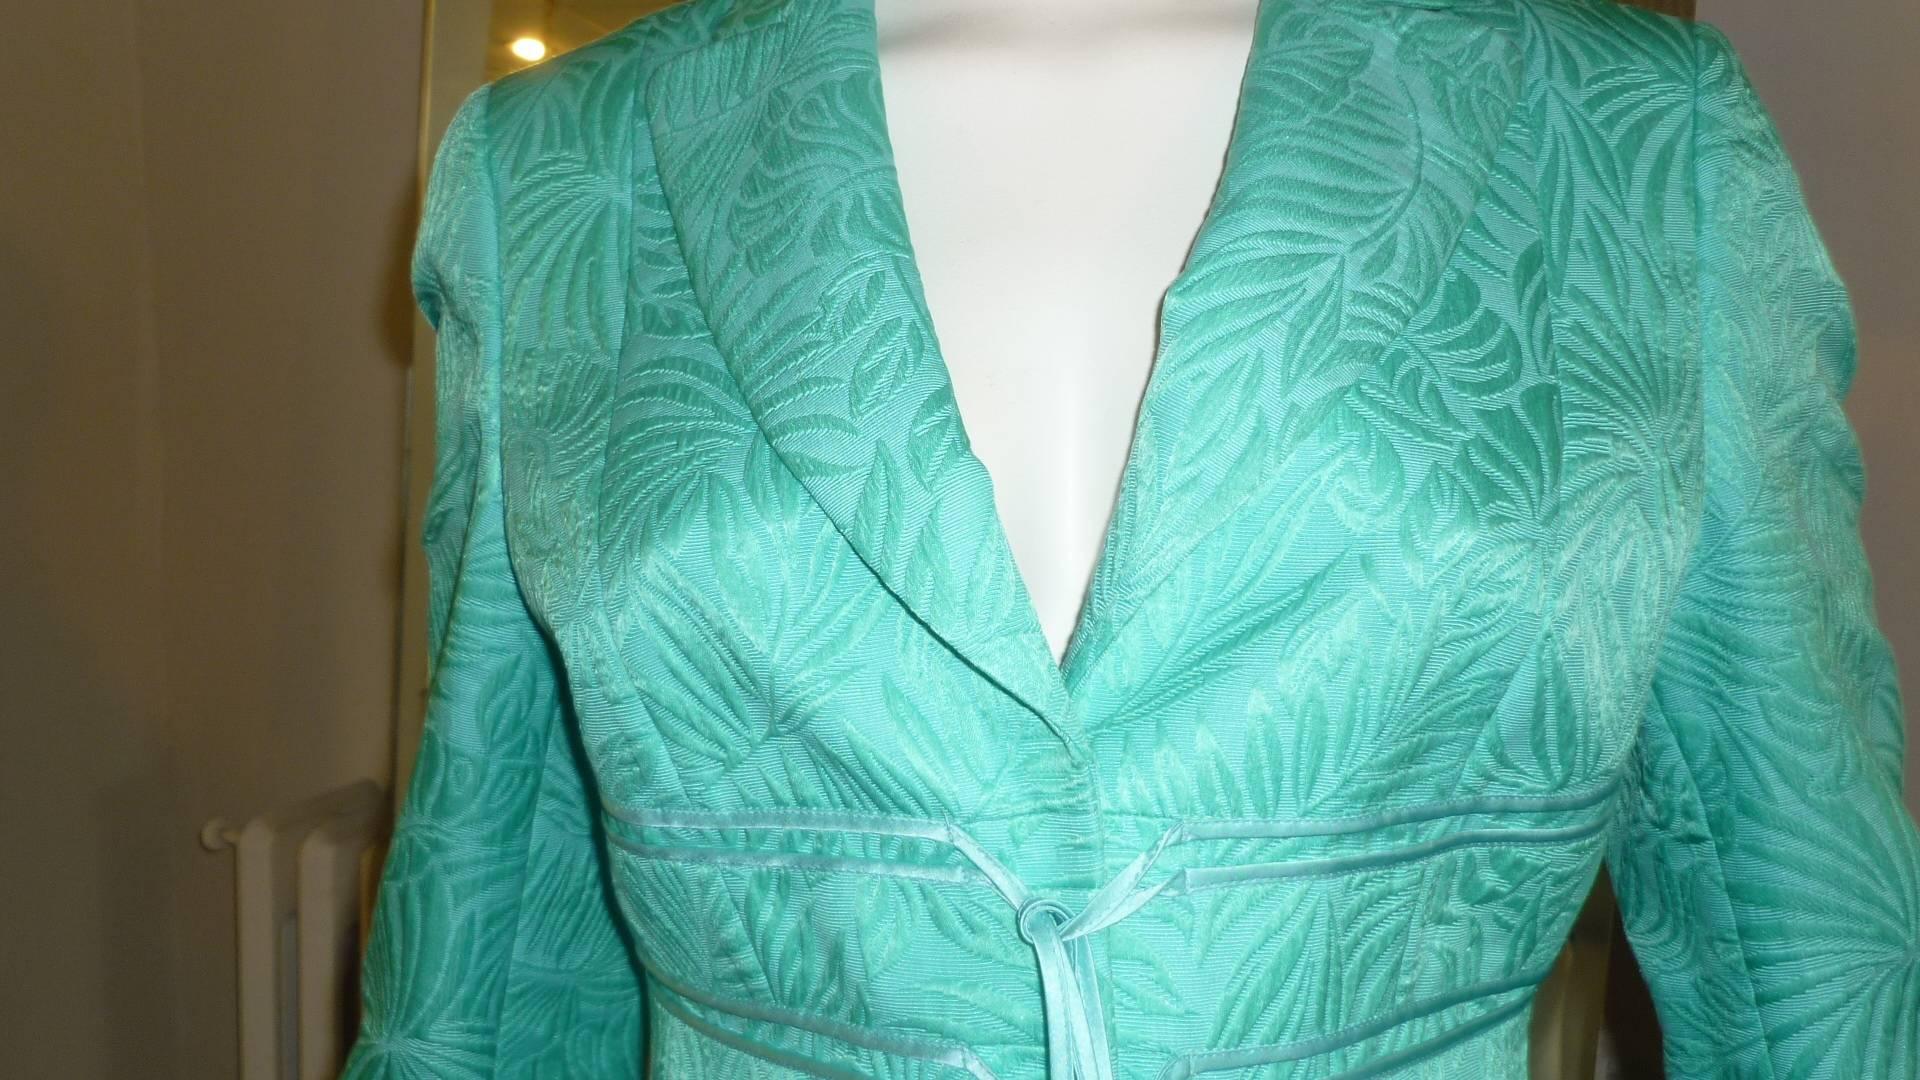 Vibrant green 70% cotton and 30% silk jacket with silk leaf raised embroidery design.

There is a lovely satin band detail throughout and closure is by three snaps and  laniards.